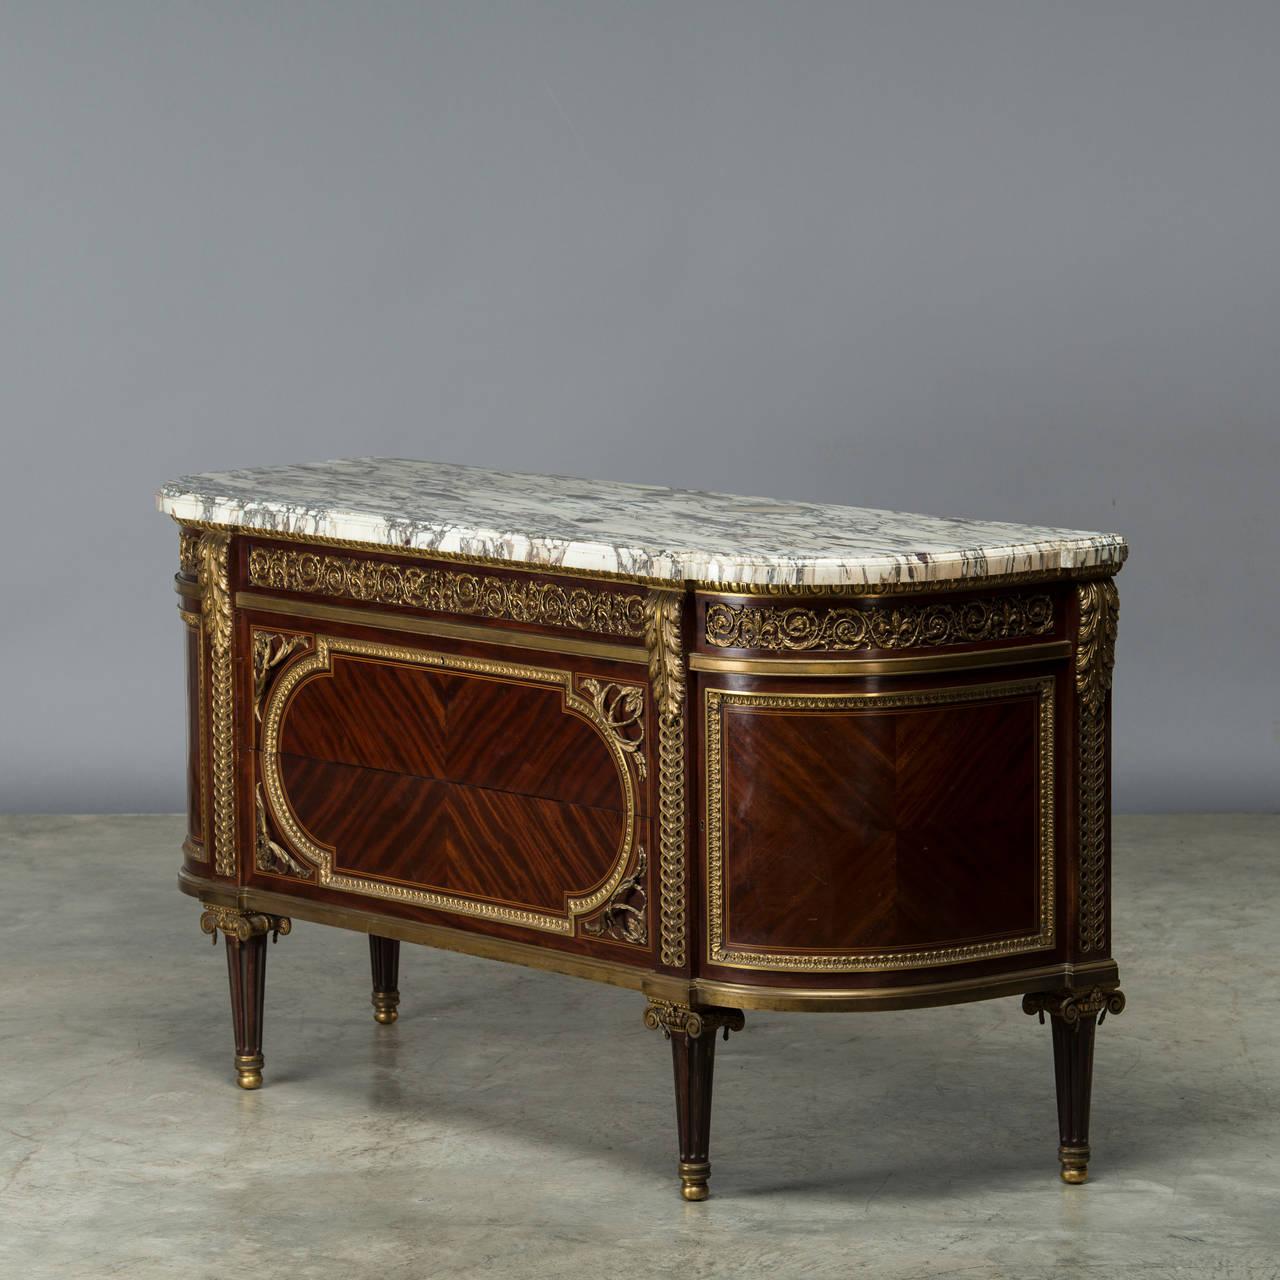 The breakfront demilune bréche Violette marble top above an egg-and-dart edge and scrolled foliage mounted frieze drawer.
Below, two long drawers with acanthus handles veneered sans traverse with boxwood stringing, flanked to each side by a